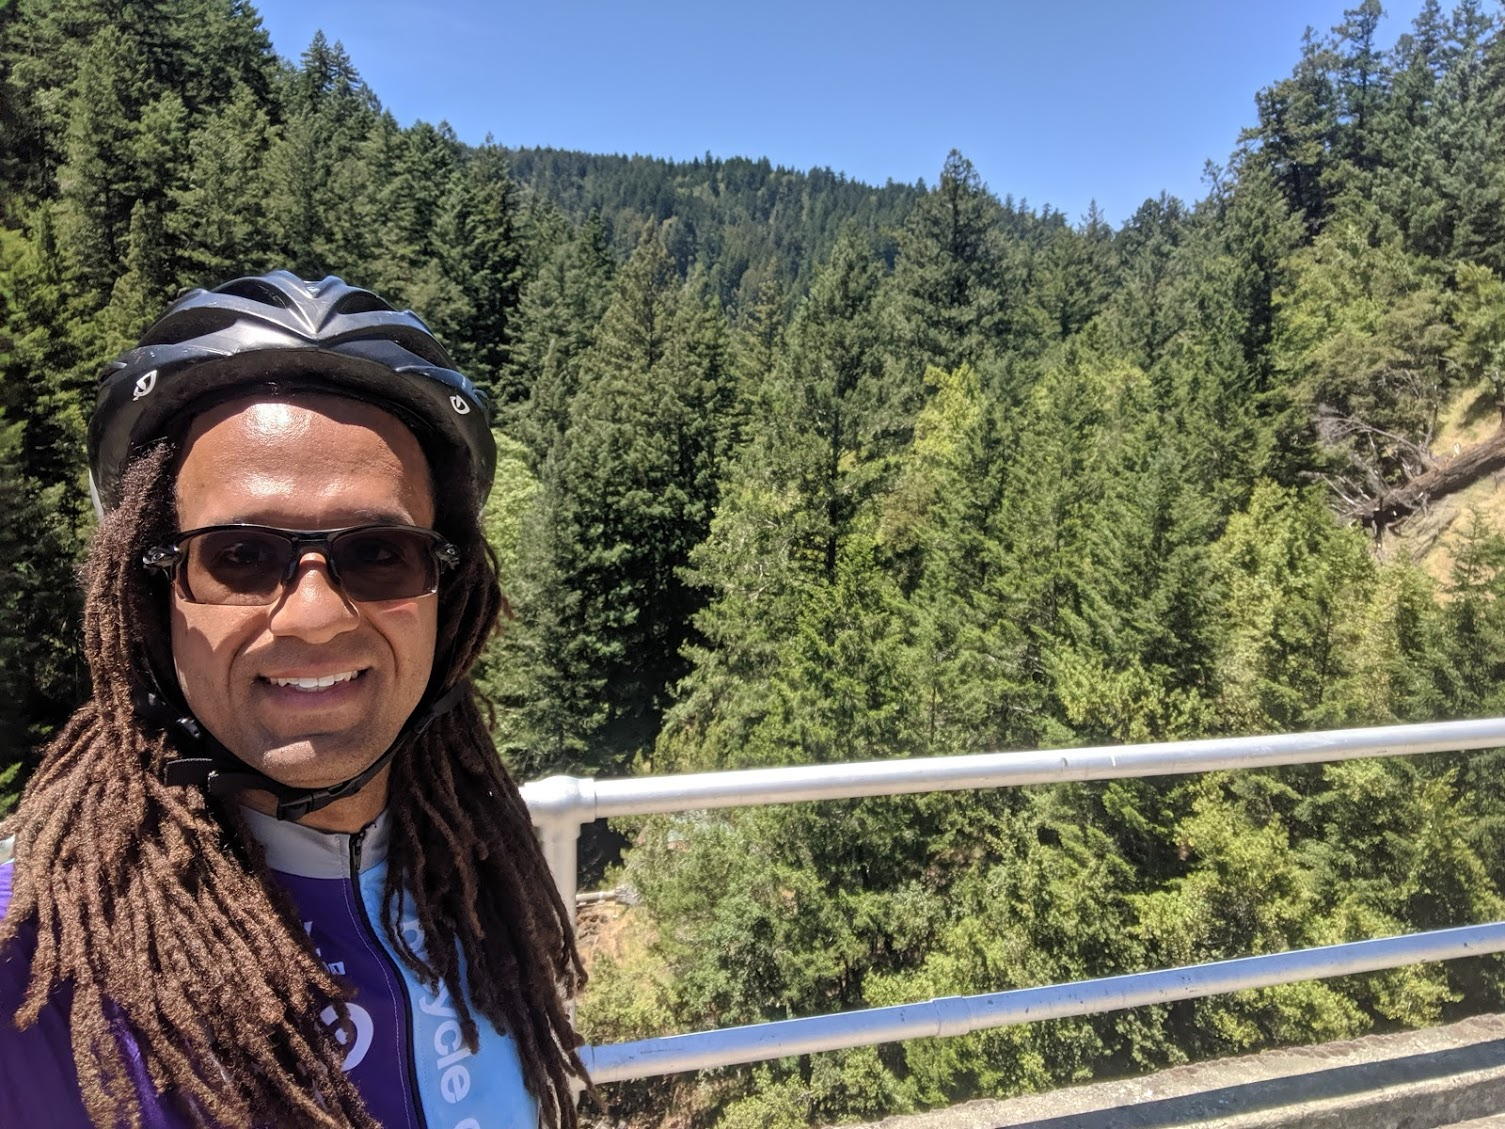 Bicycle Coalition member Ryan Sullivan rocking a helmet in front of a beautiful landscape of trees